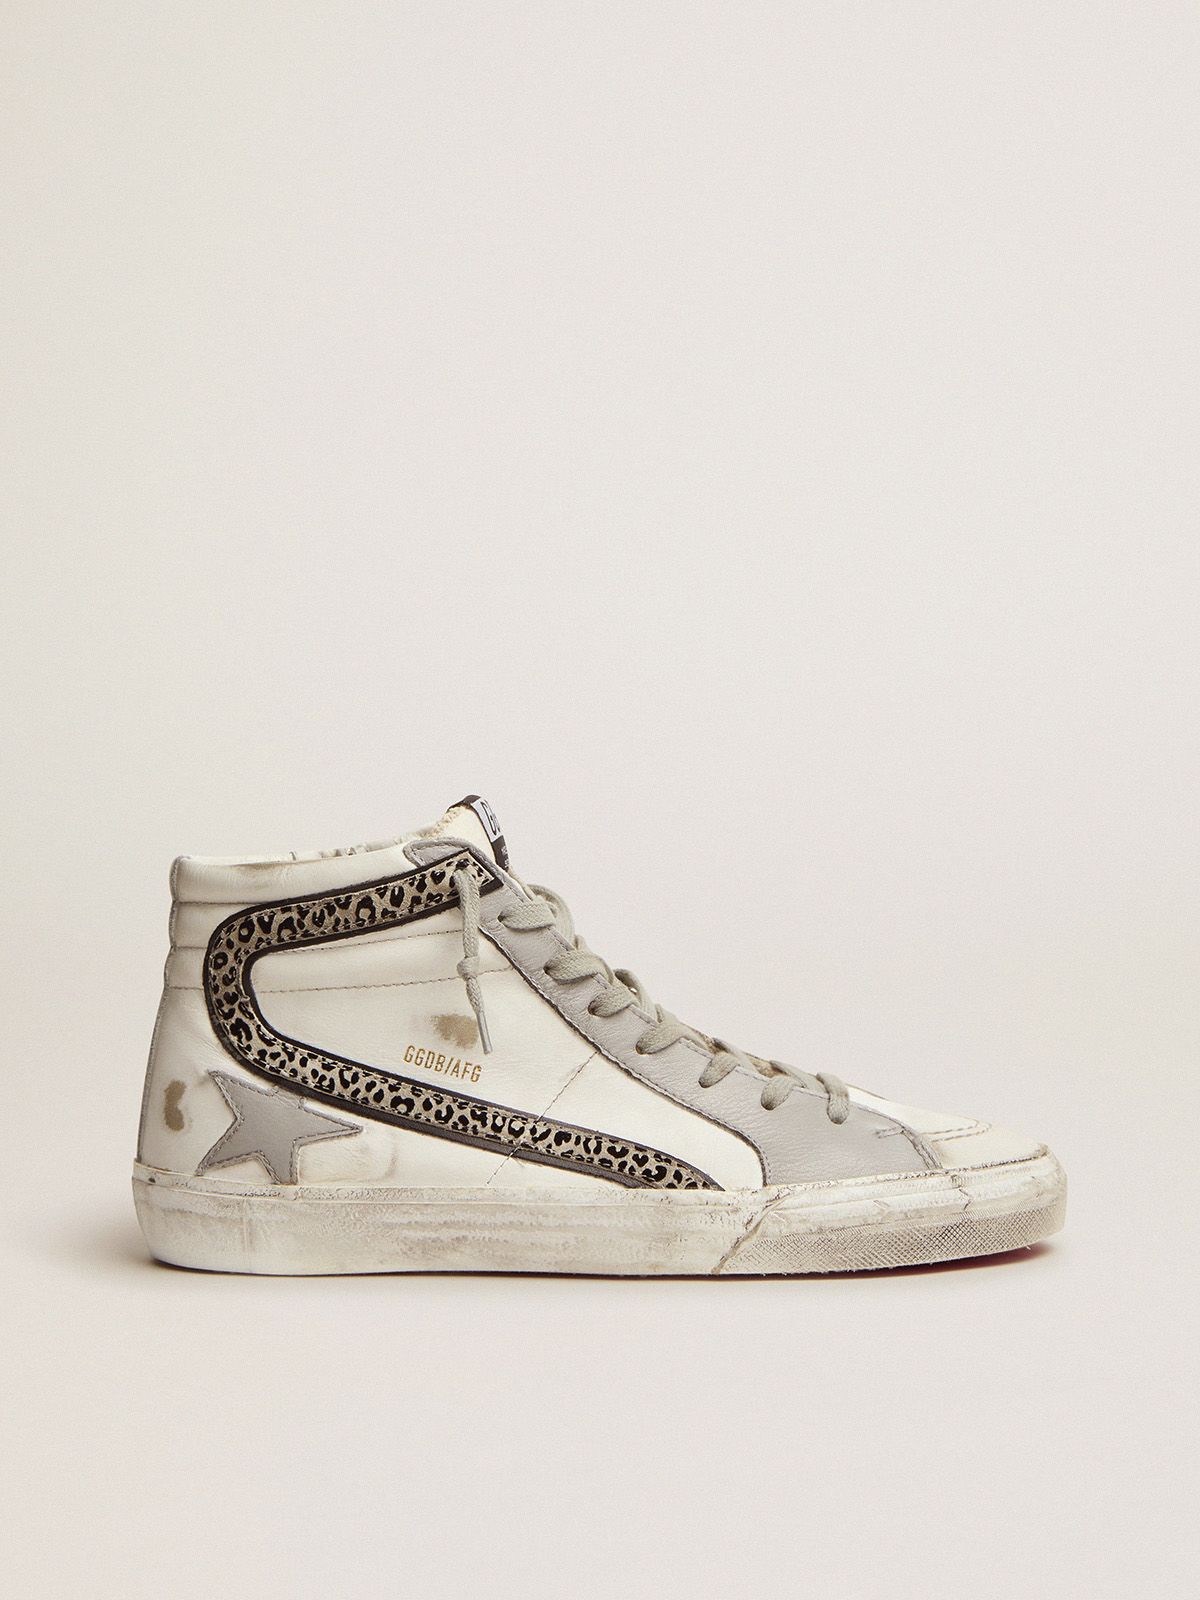 Slide sneakers with white leather upper and animal-print suede flash